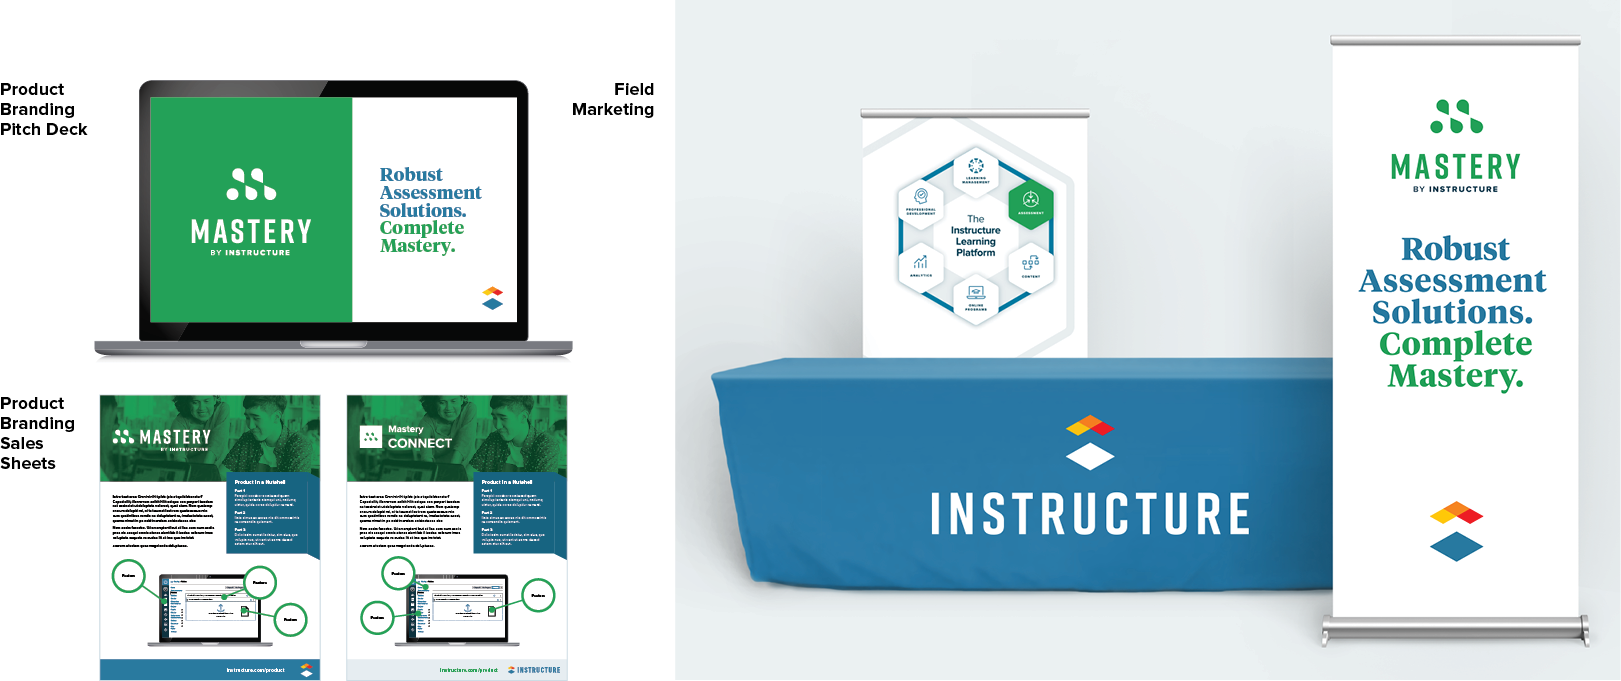 Instructure + Mastery co-branding example